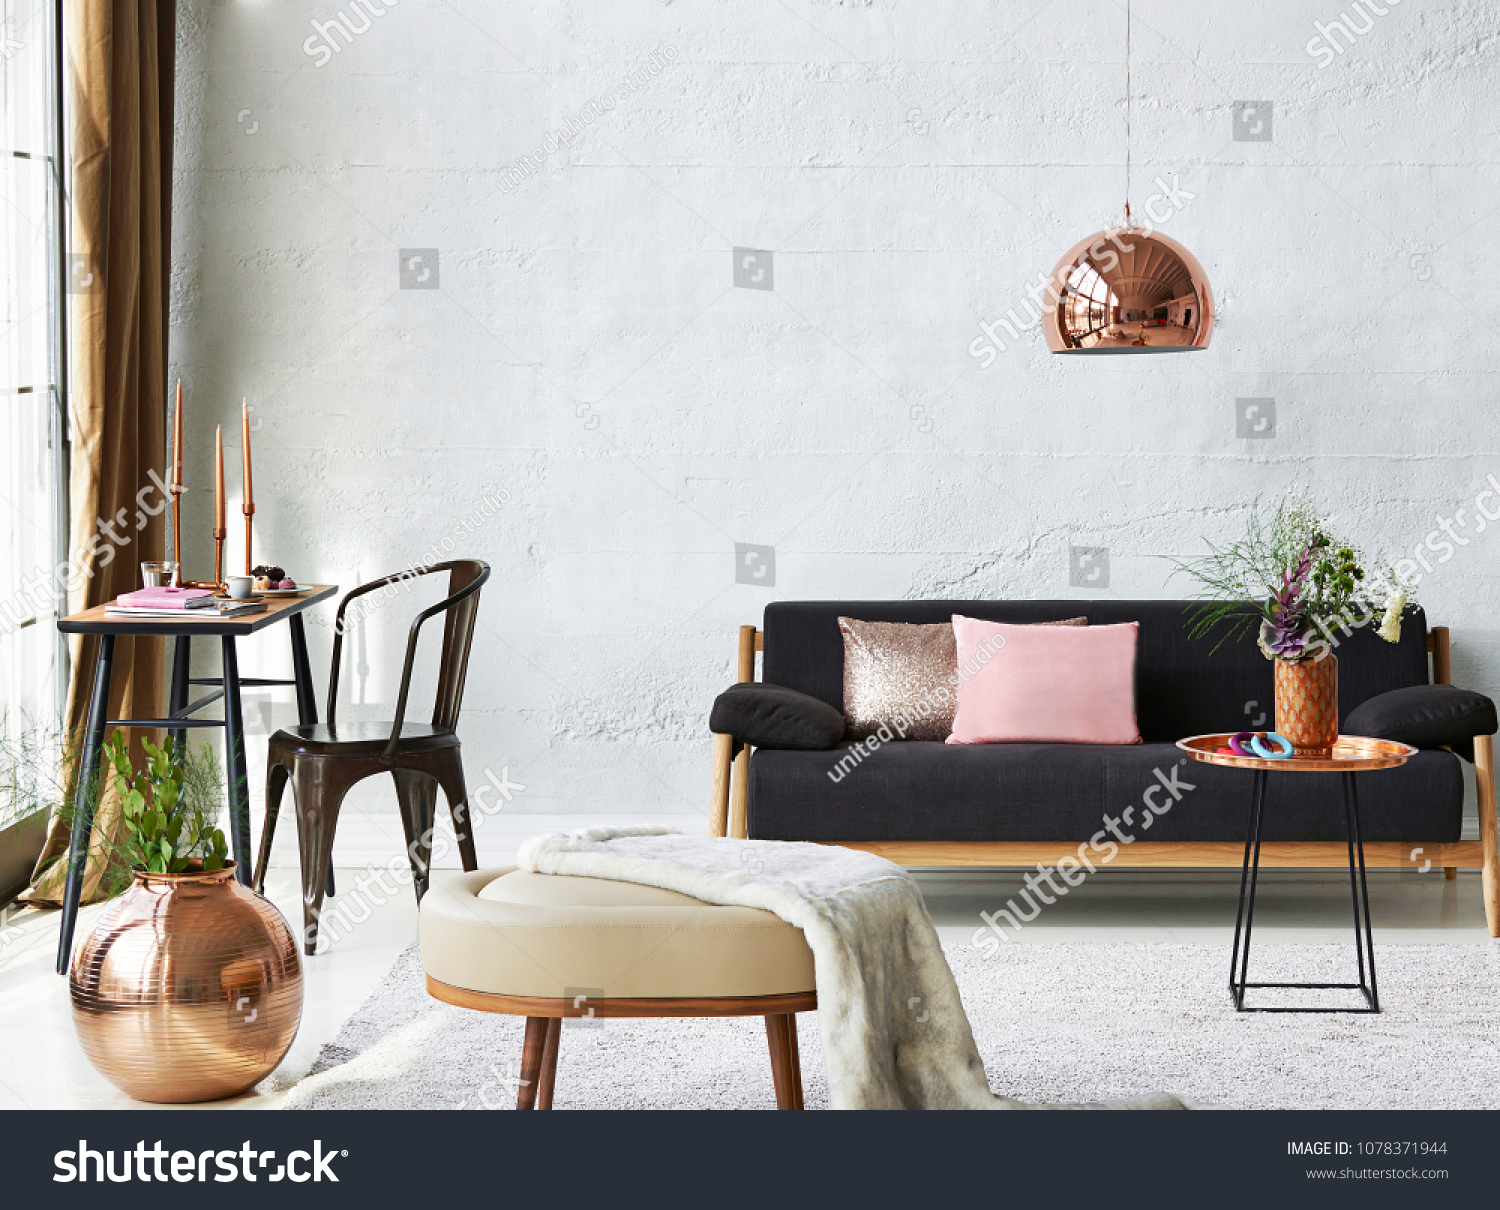 Living Room Room Concept Furniture Decoration Stock Photo 1078371944 ...